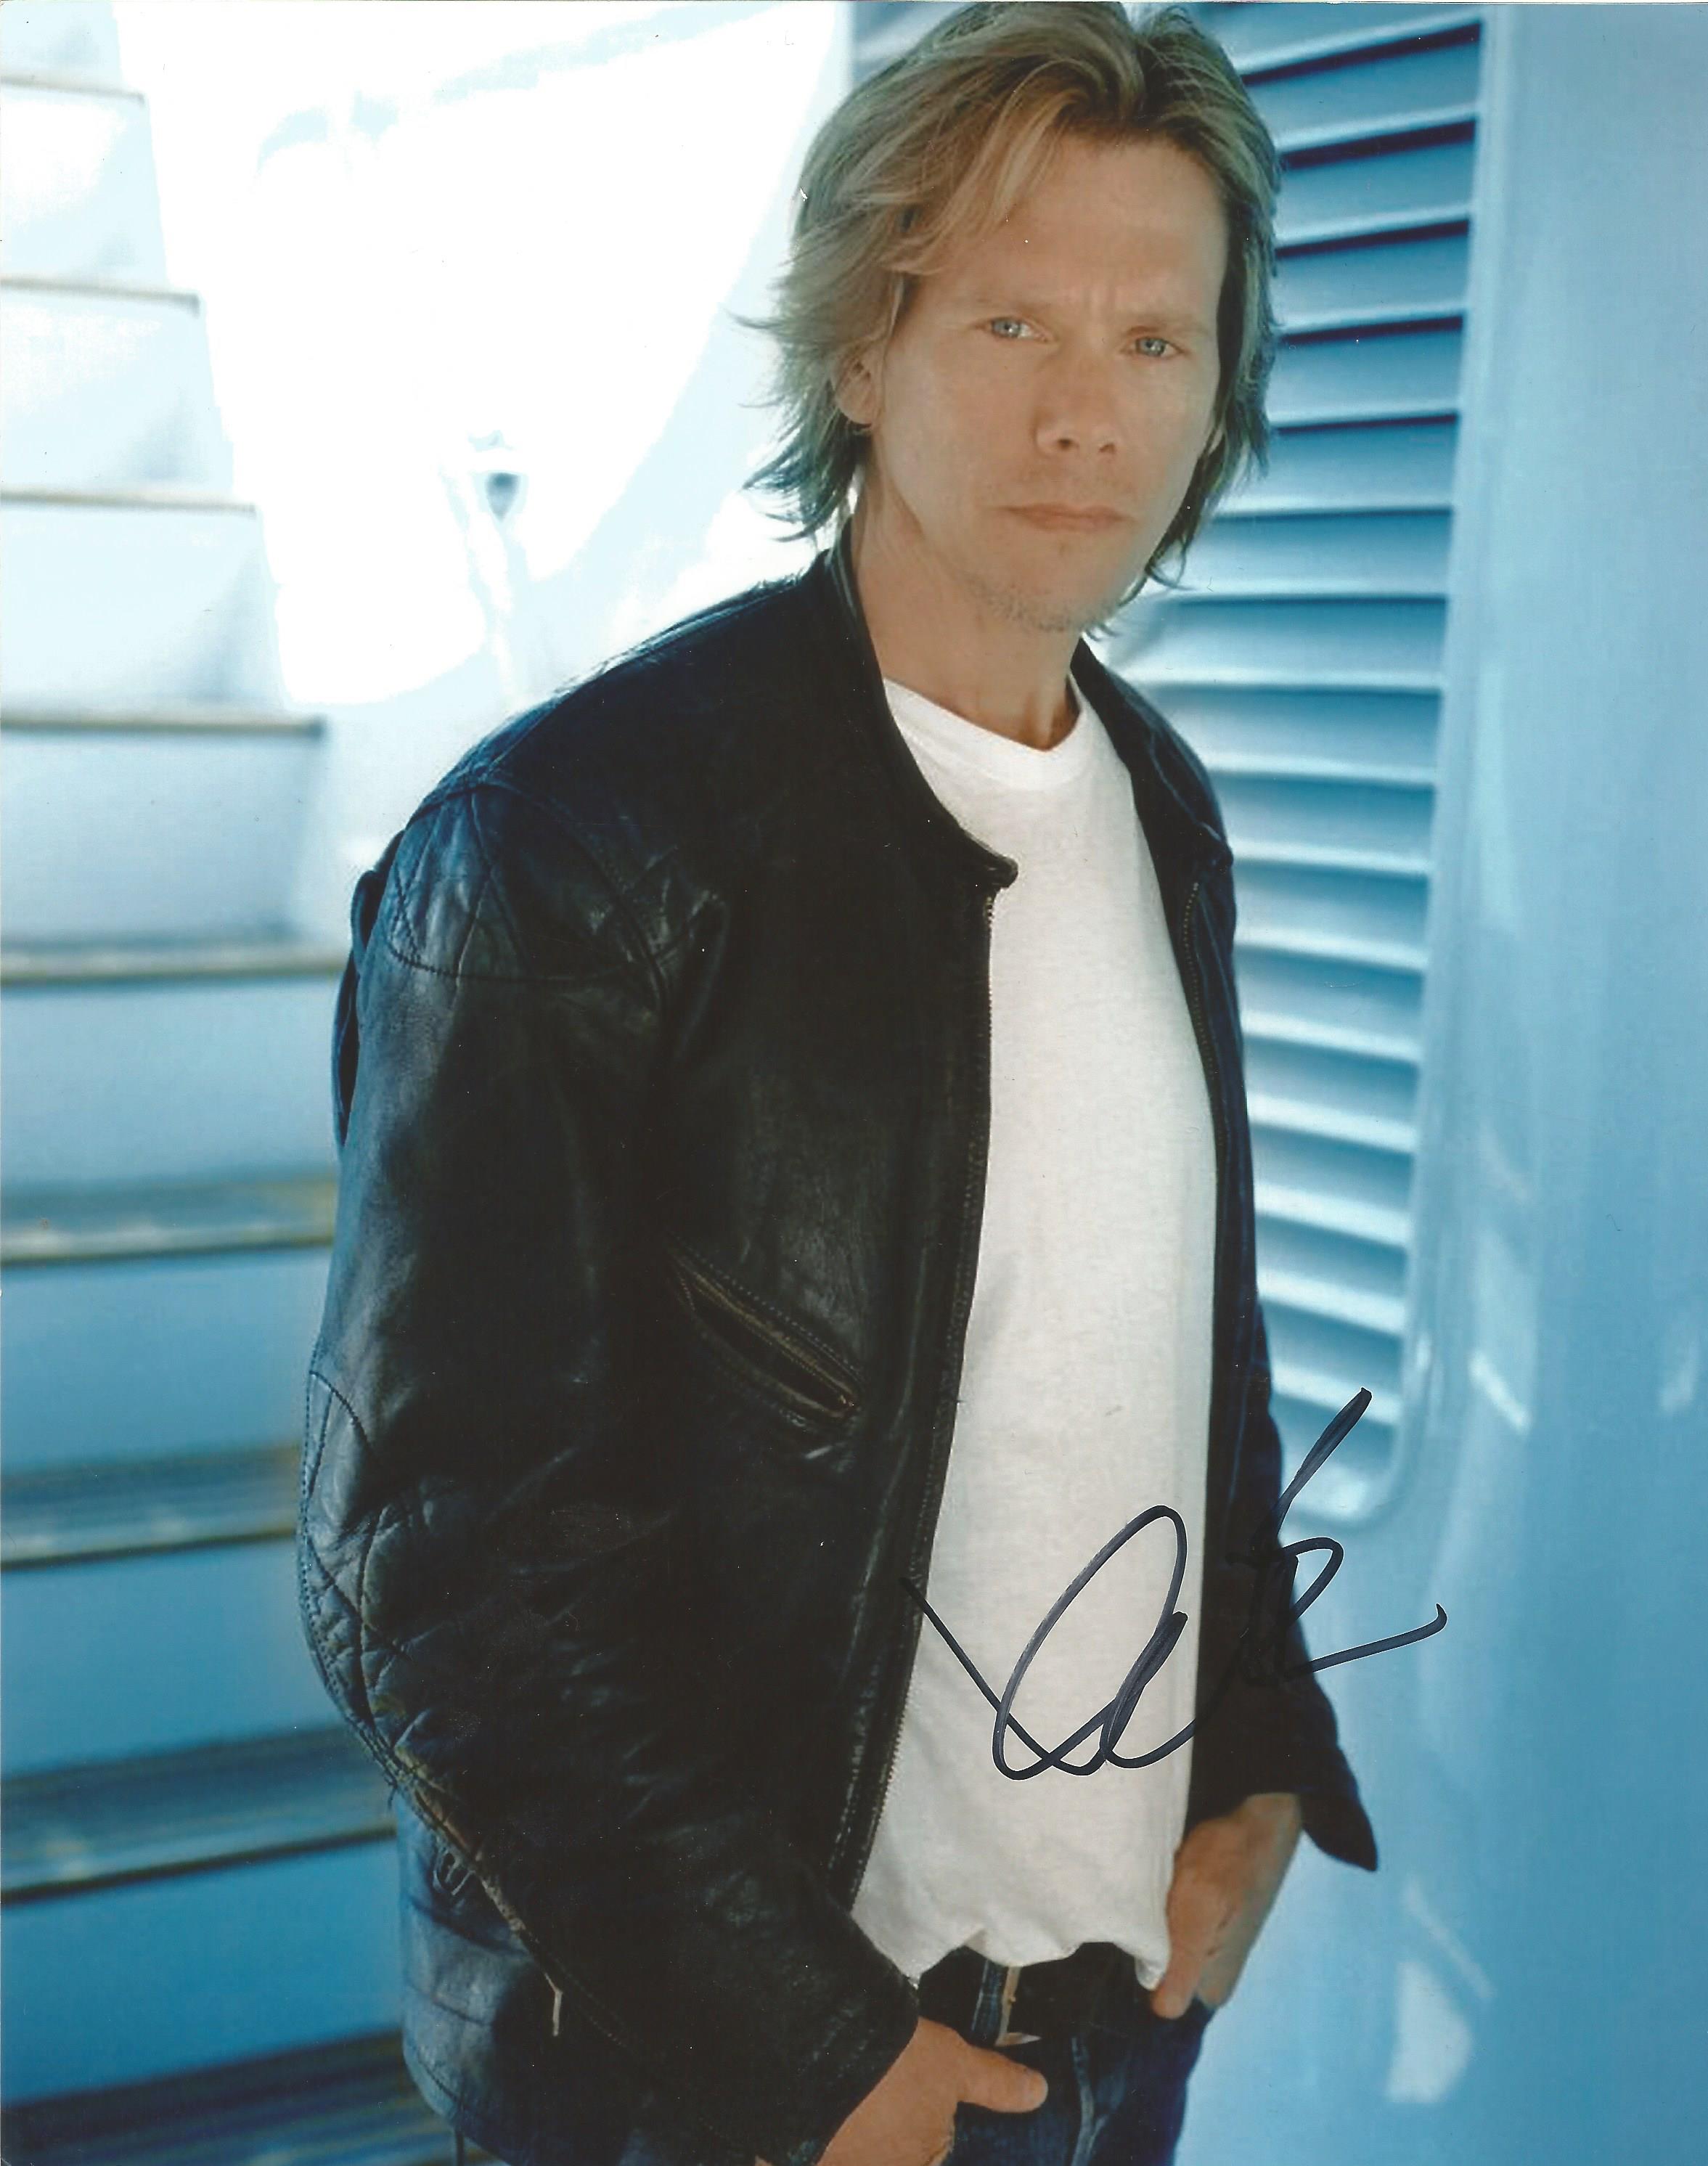 Kevin Bacon signed 10 x 8 colour Photoshoot Portrait Photo, from in person collection autographed at